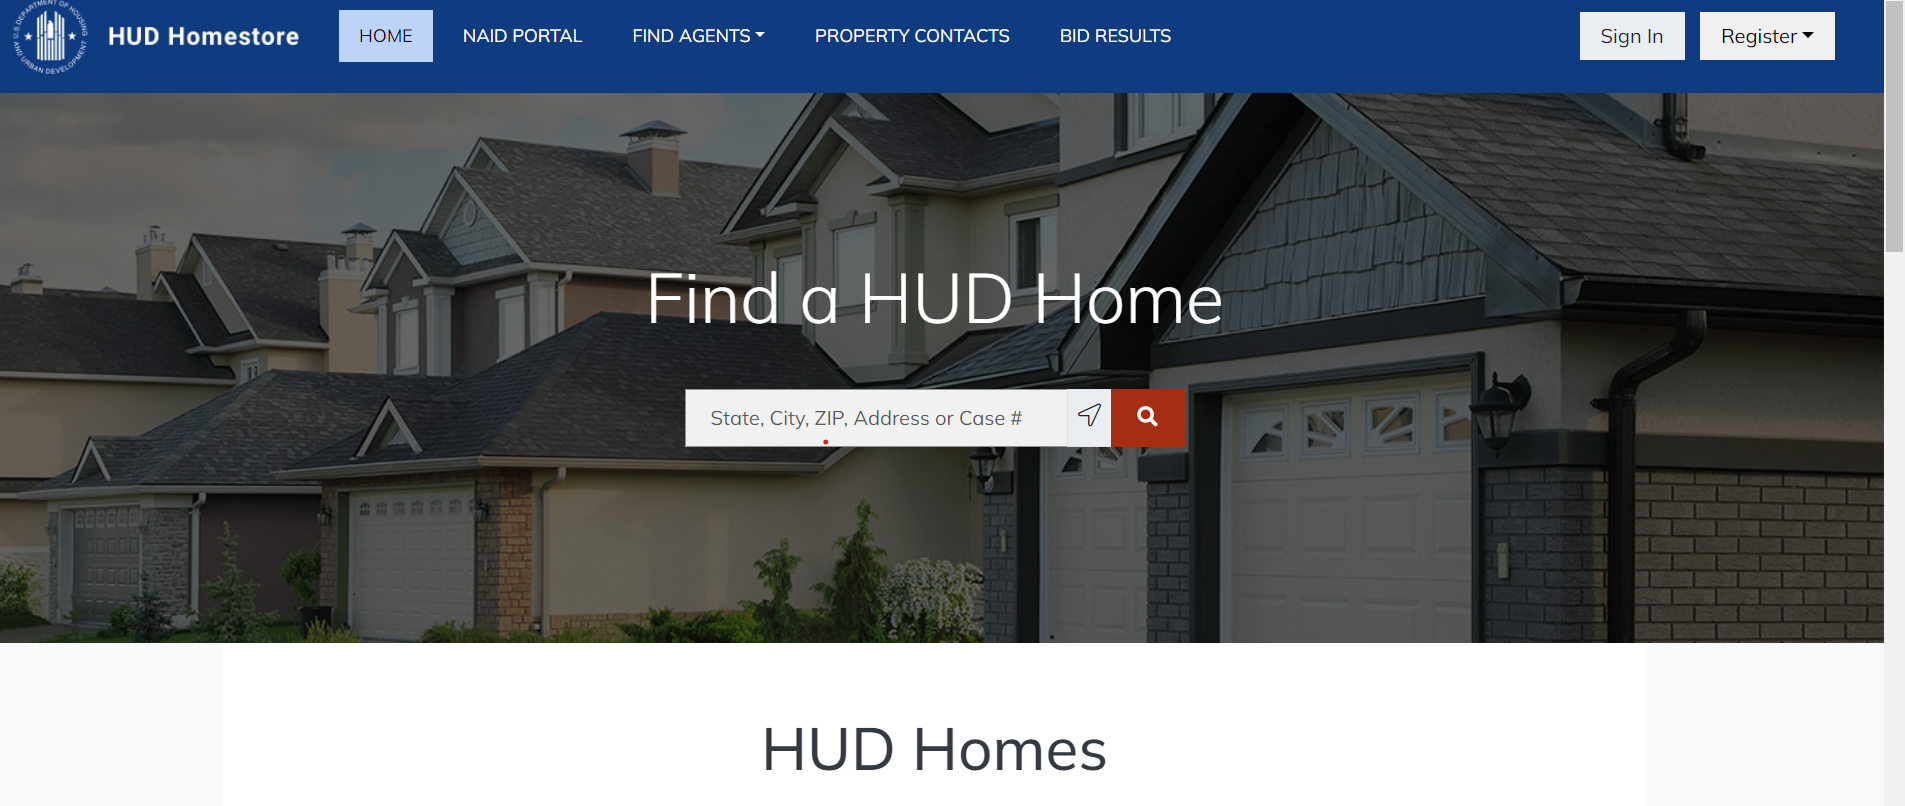 Ever wondered what a HUD Home is?